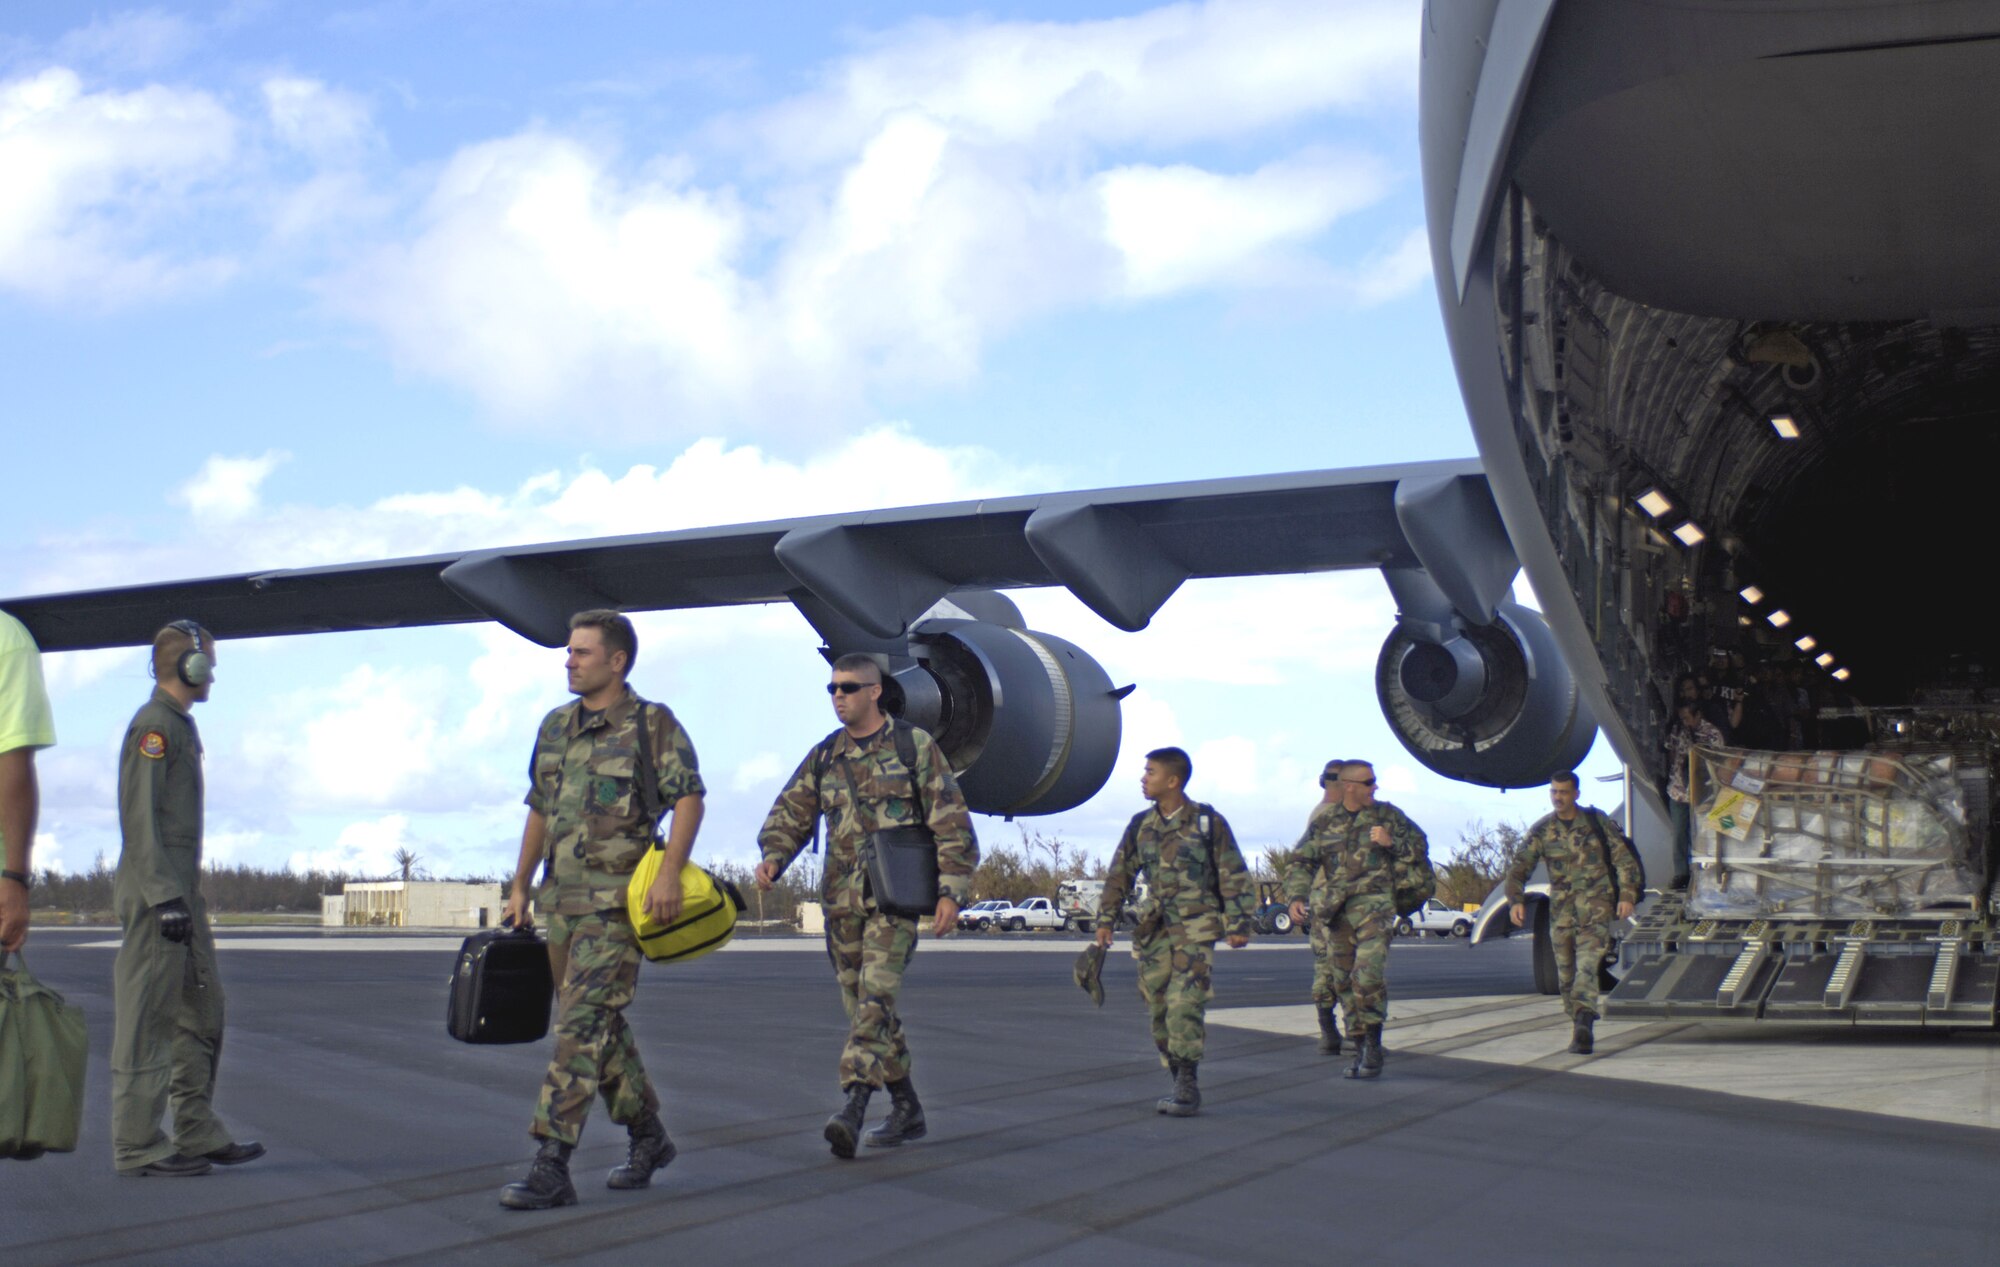 Airmen, part of a 53-person assessment team, get off a C-17 Globemaster III at Wake Island Sept. 12. The team is assessing damage left by Super Typhoon Ioke after it struck the island Aug. 31. (U.S. Air Force photo/Tech. Sgt. Shane A. Cuomo) 